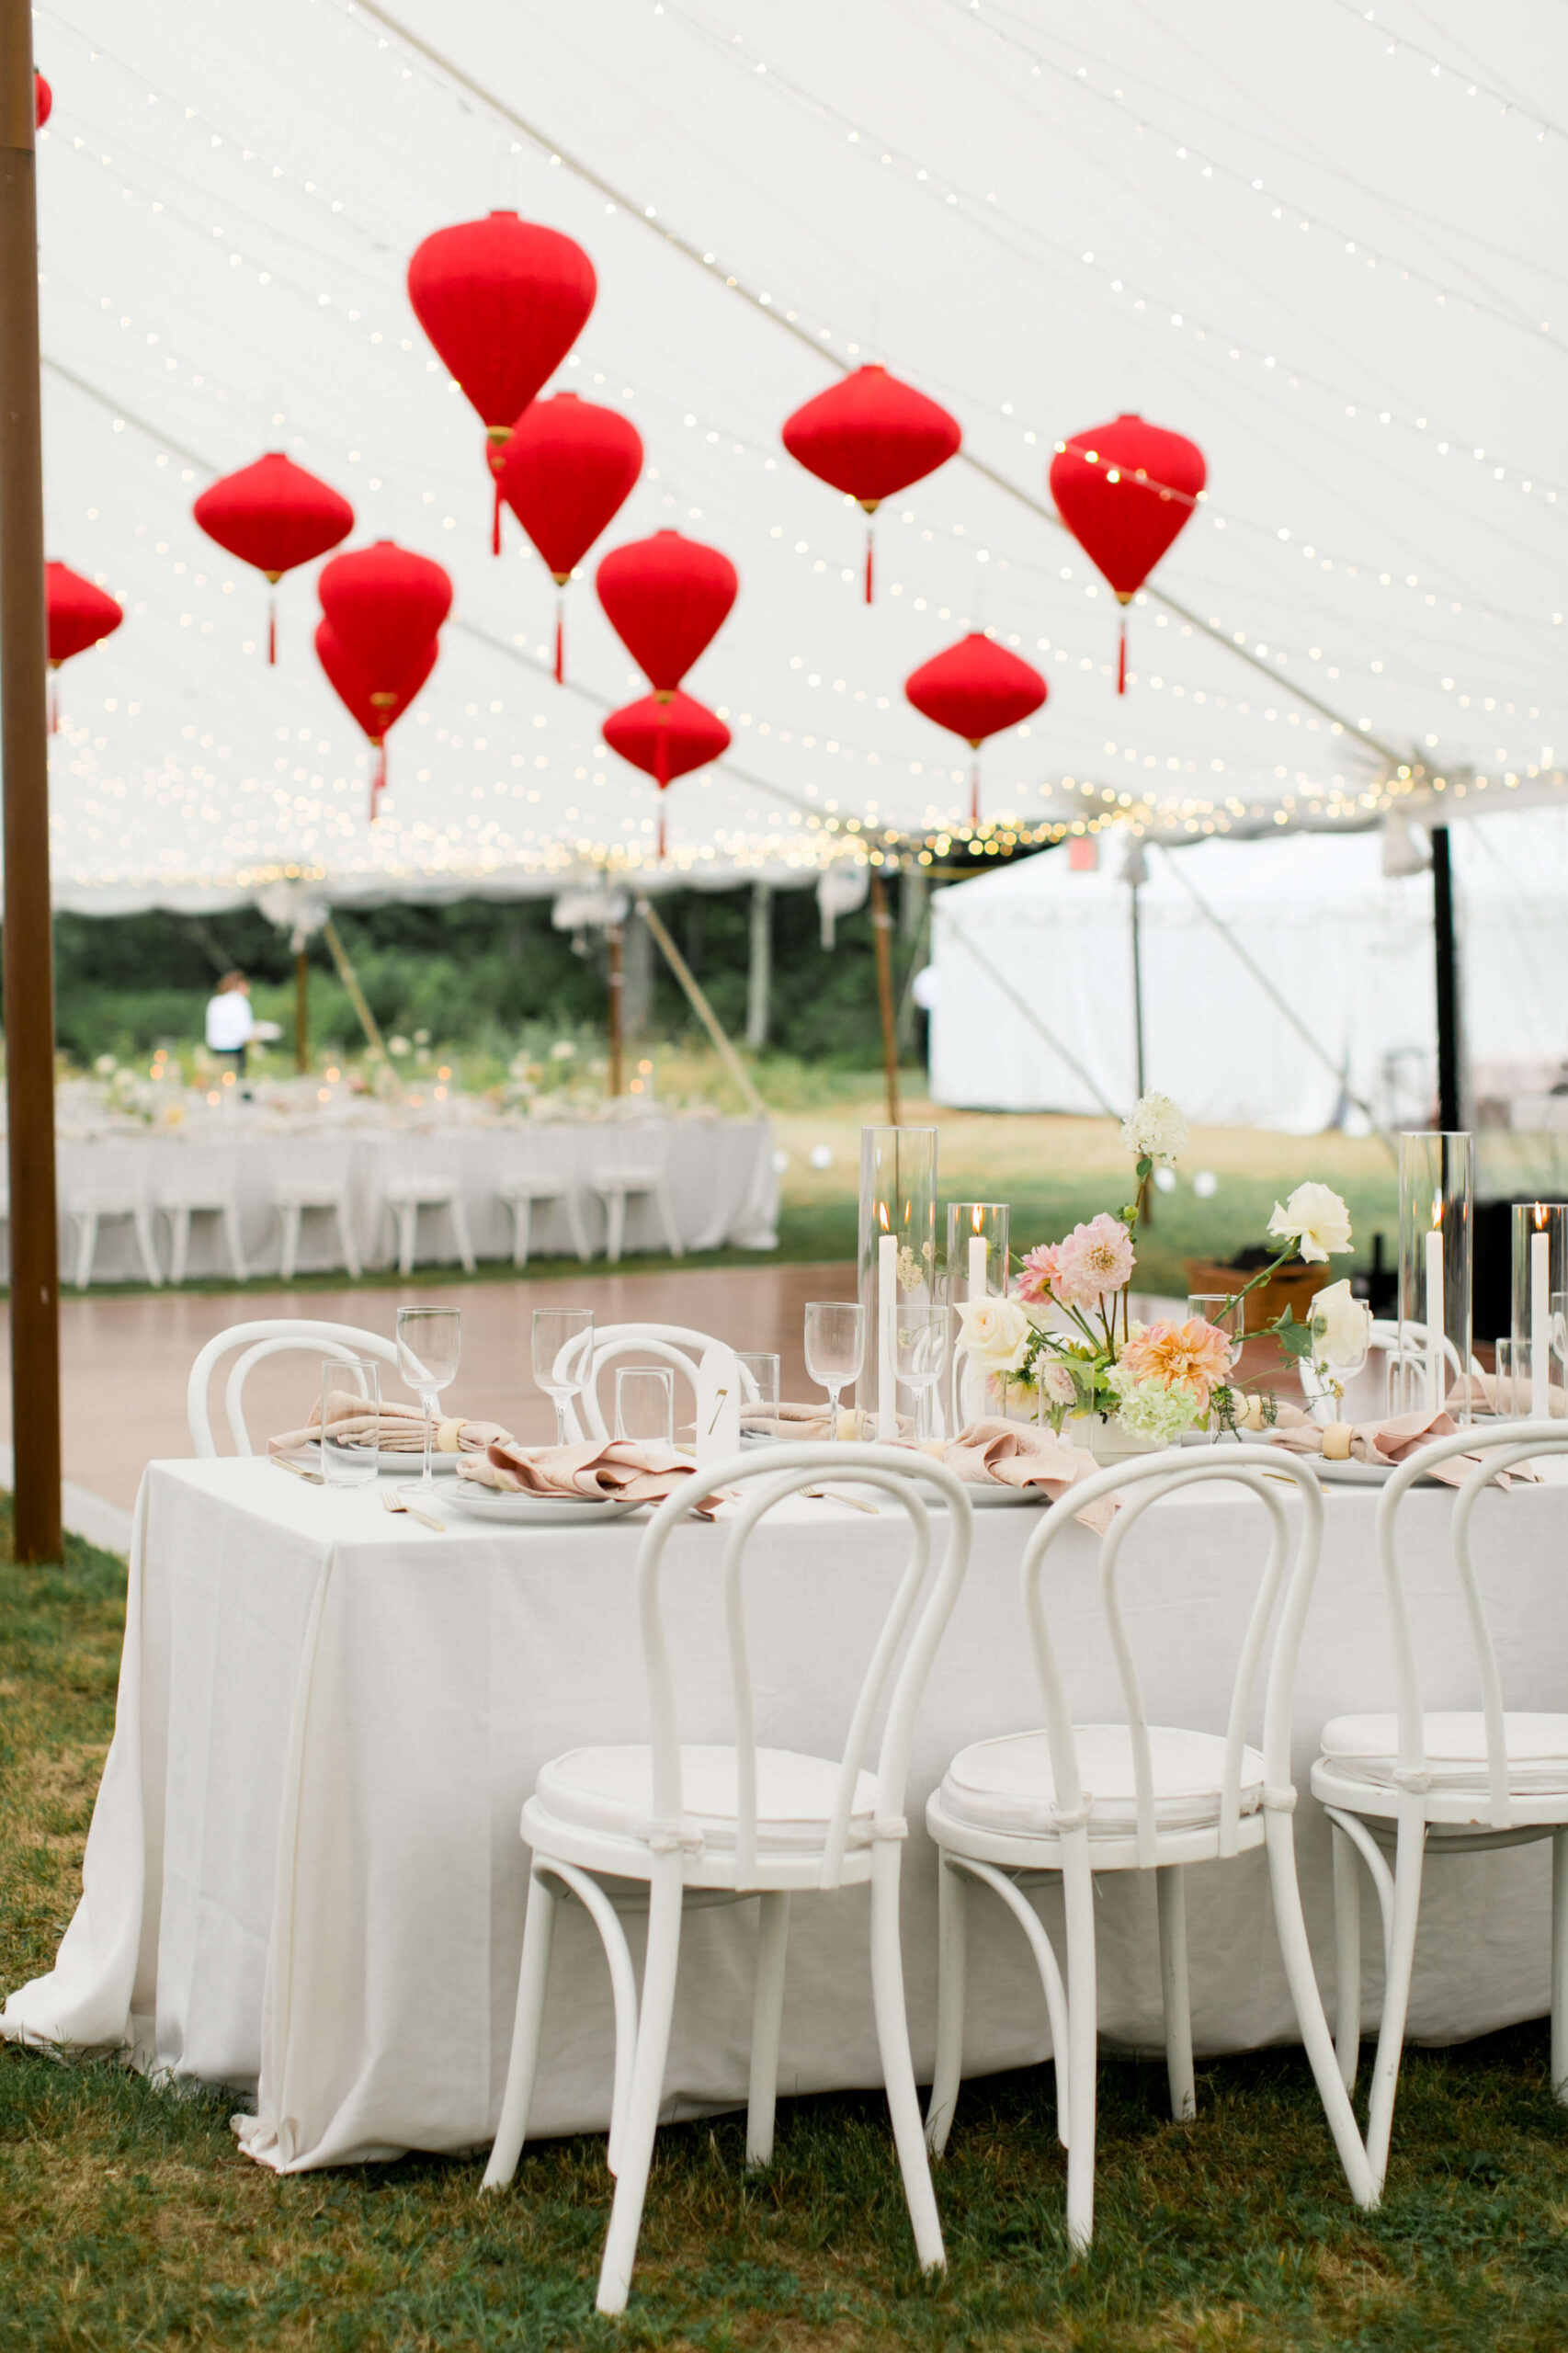 Red Chinese lanterns were hung in the tent of a Connecticut Wedding.